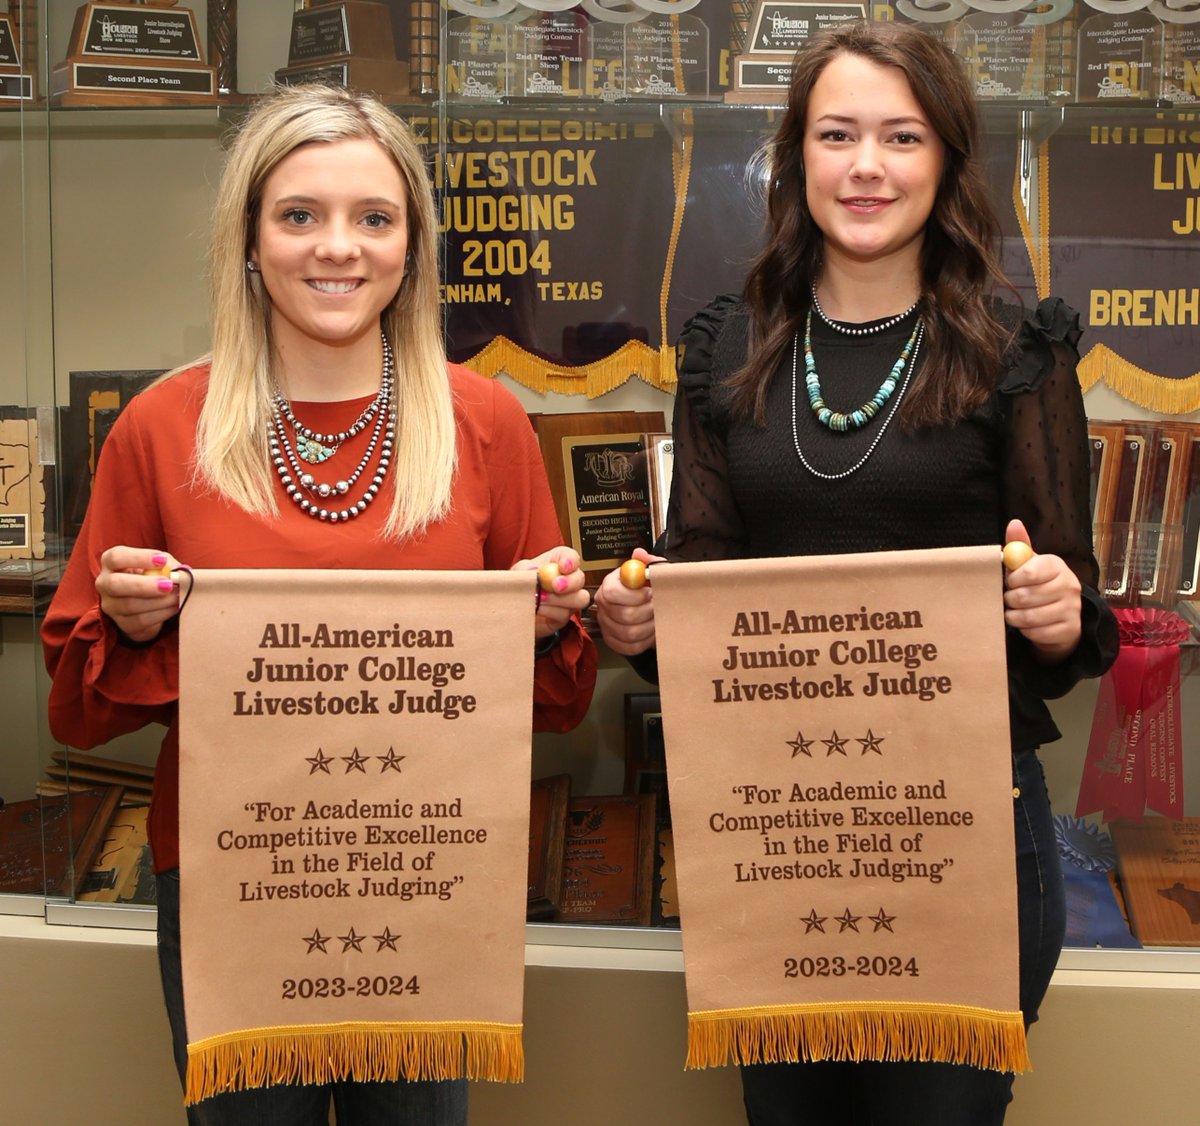 Congrats to Devyn Gaff and Kinsey Gardner for recently being named All-American two-year college livestock judges! Read more about why these best friends chose #Blinn to continue their livestock judging careers after 4-H and what's up next ➡️ bit.ly/3woUUqe